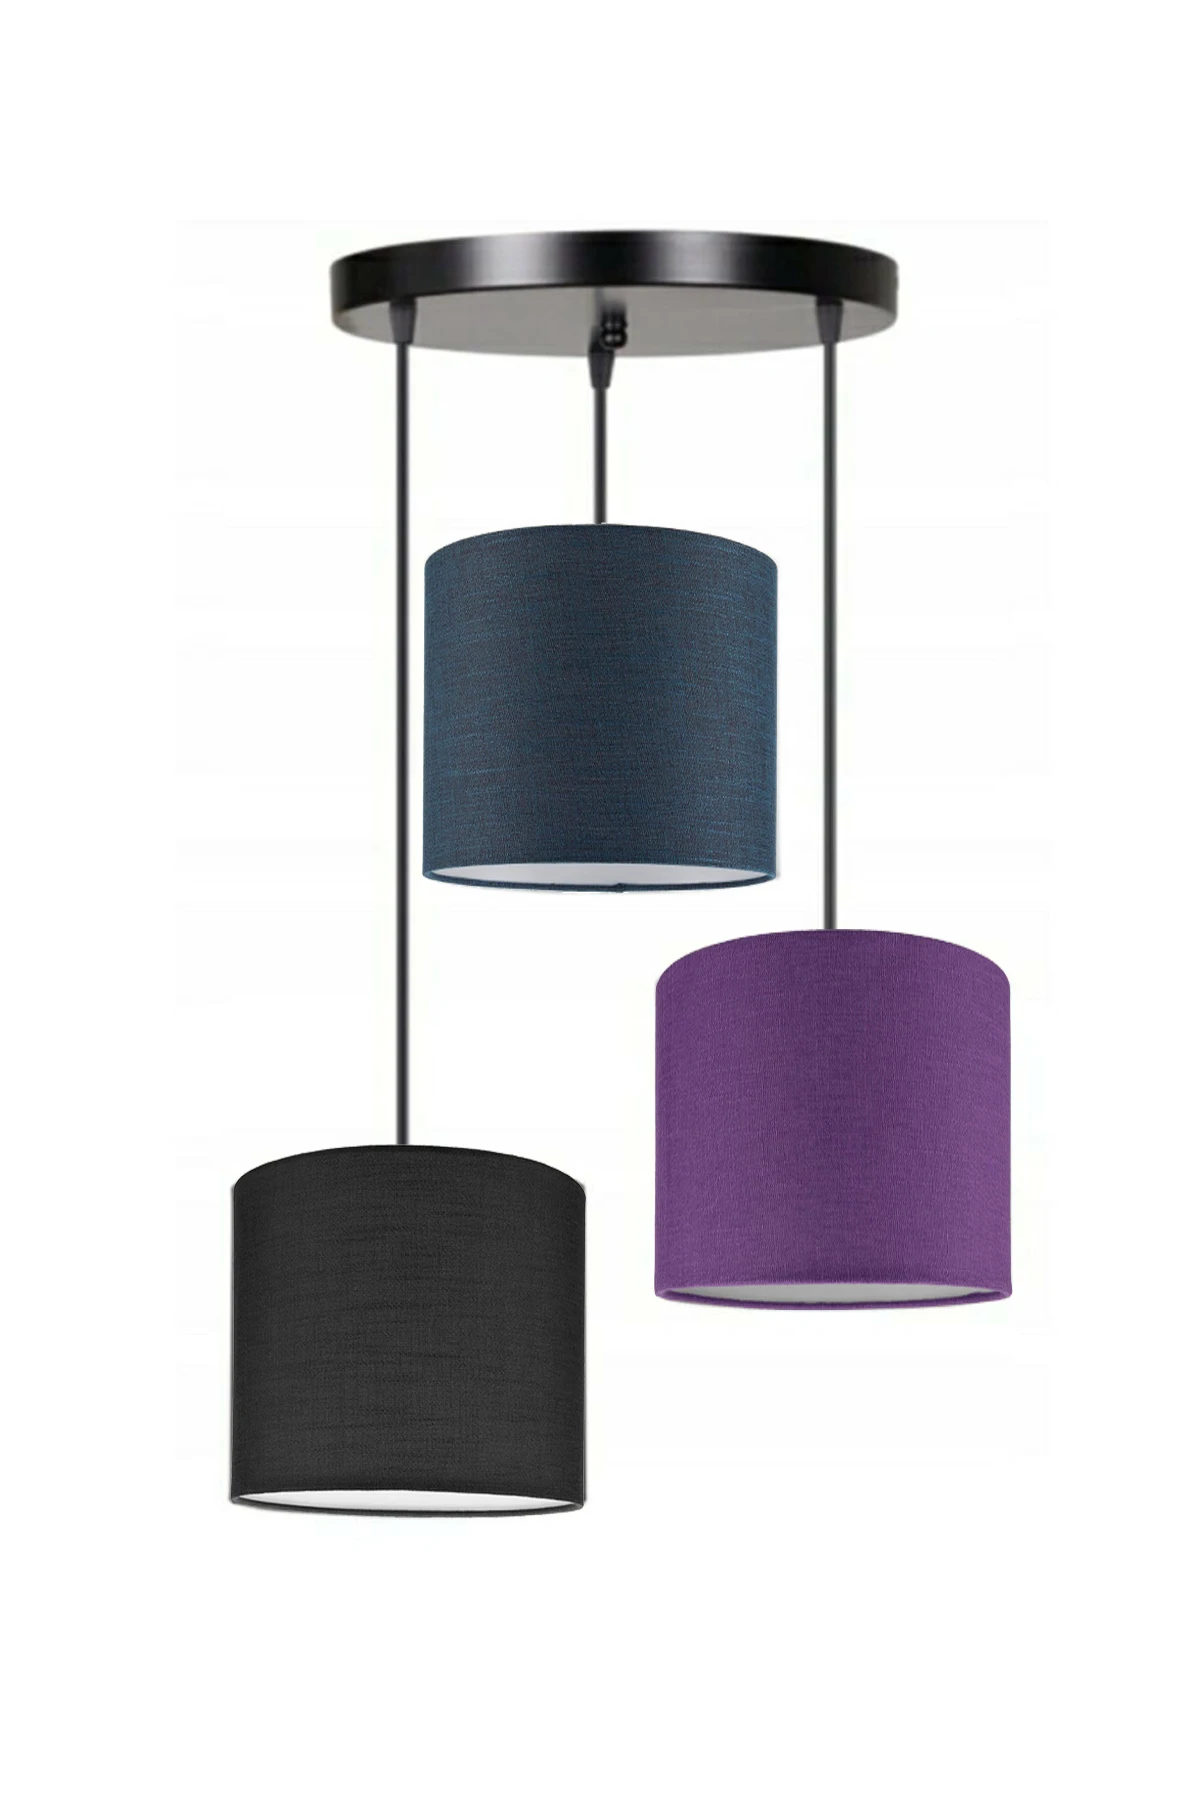 3 Heads Black Navy Blue Purple Cylinder Fabric Lampshade Pendant Lamp Chandelier Modern Decorative Design Home Hotel Office Use